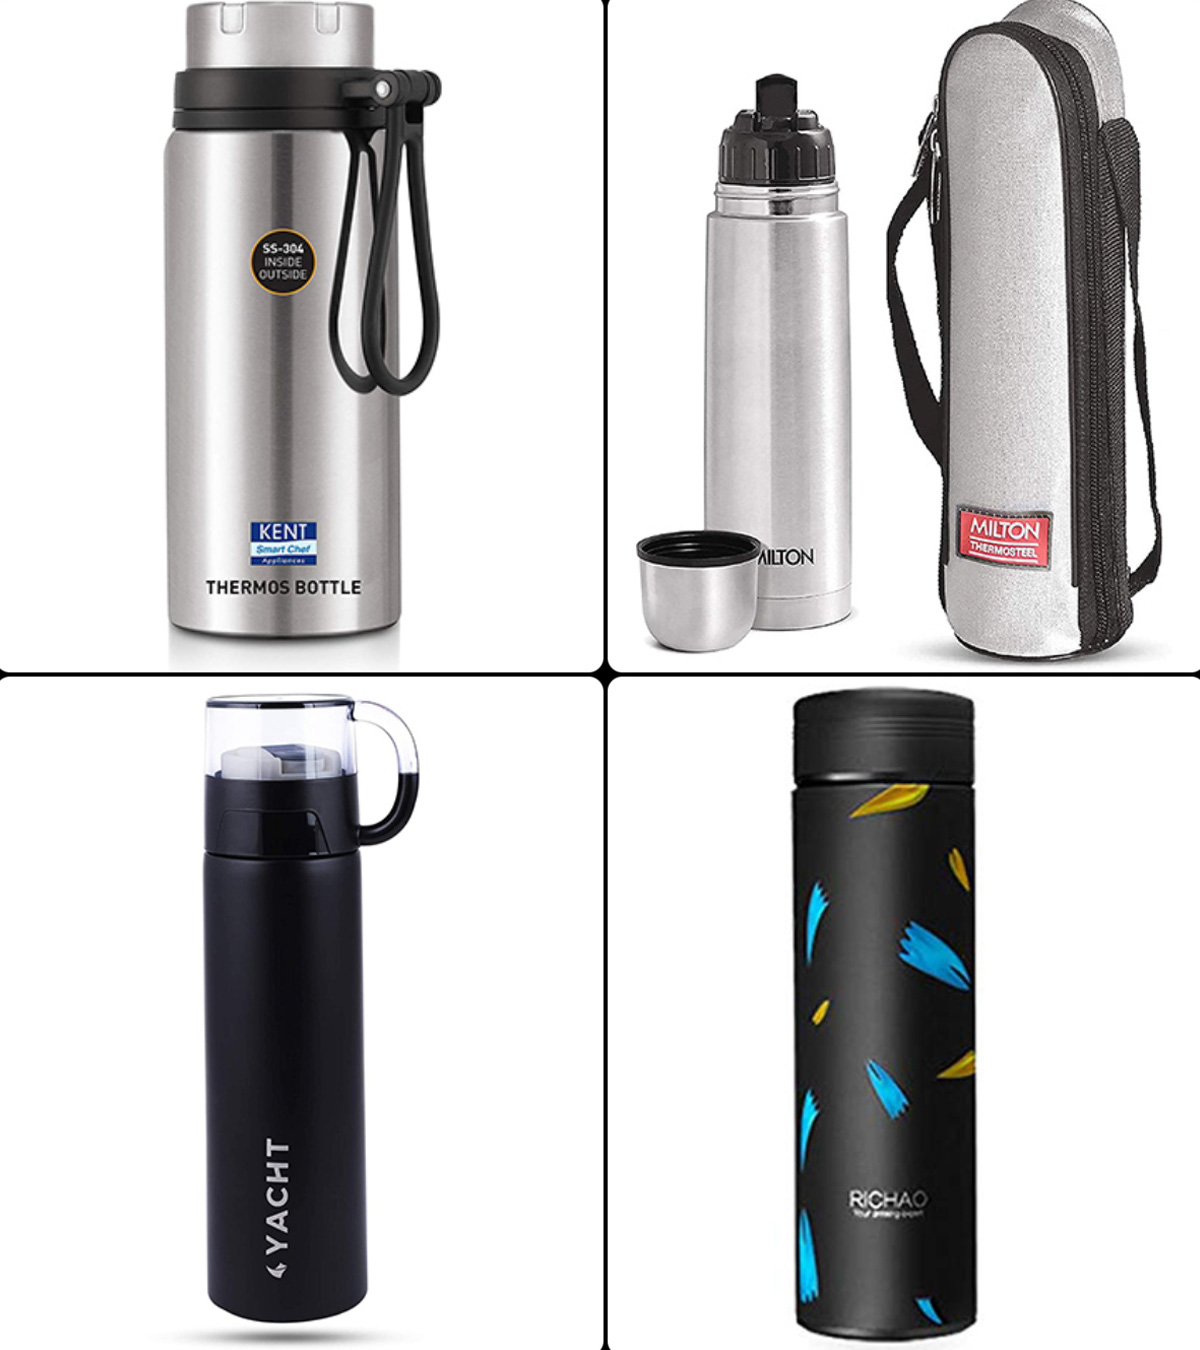 How does a thermos flask keep a cold liquid cold? - Quora